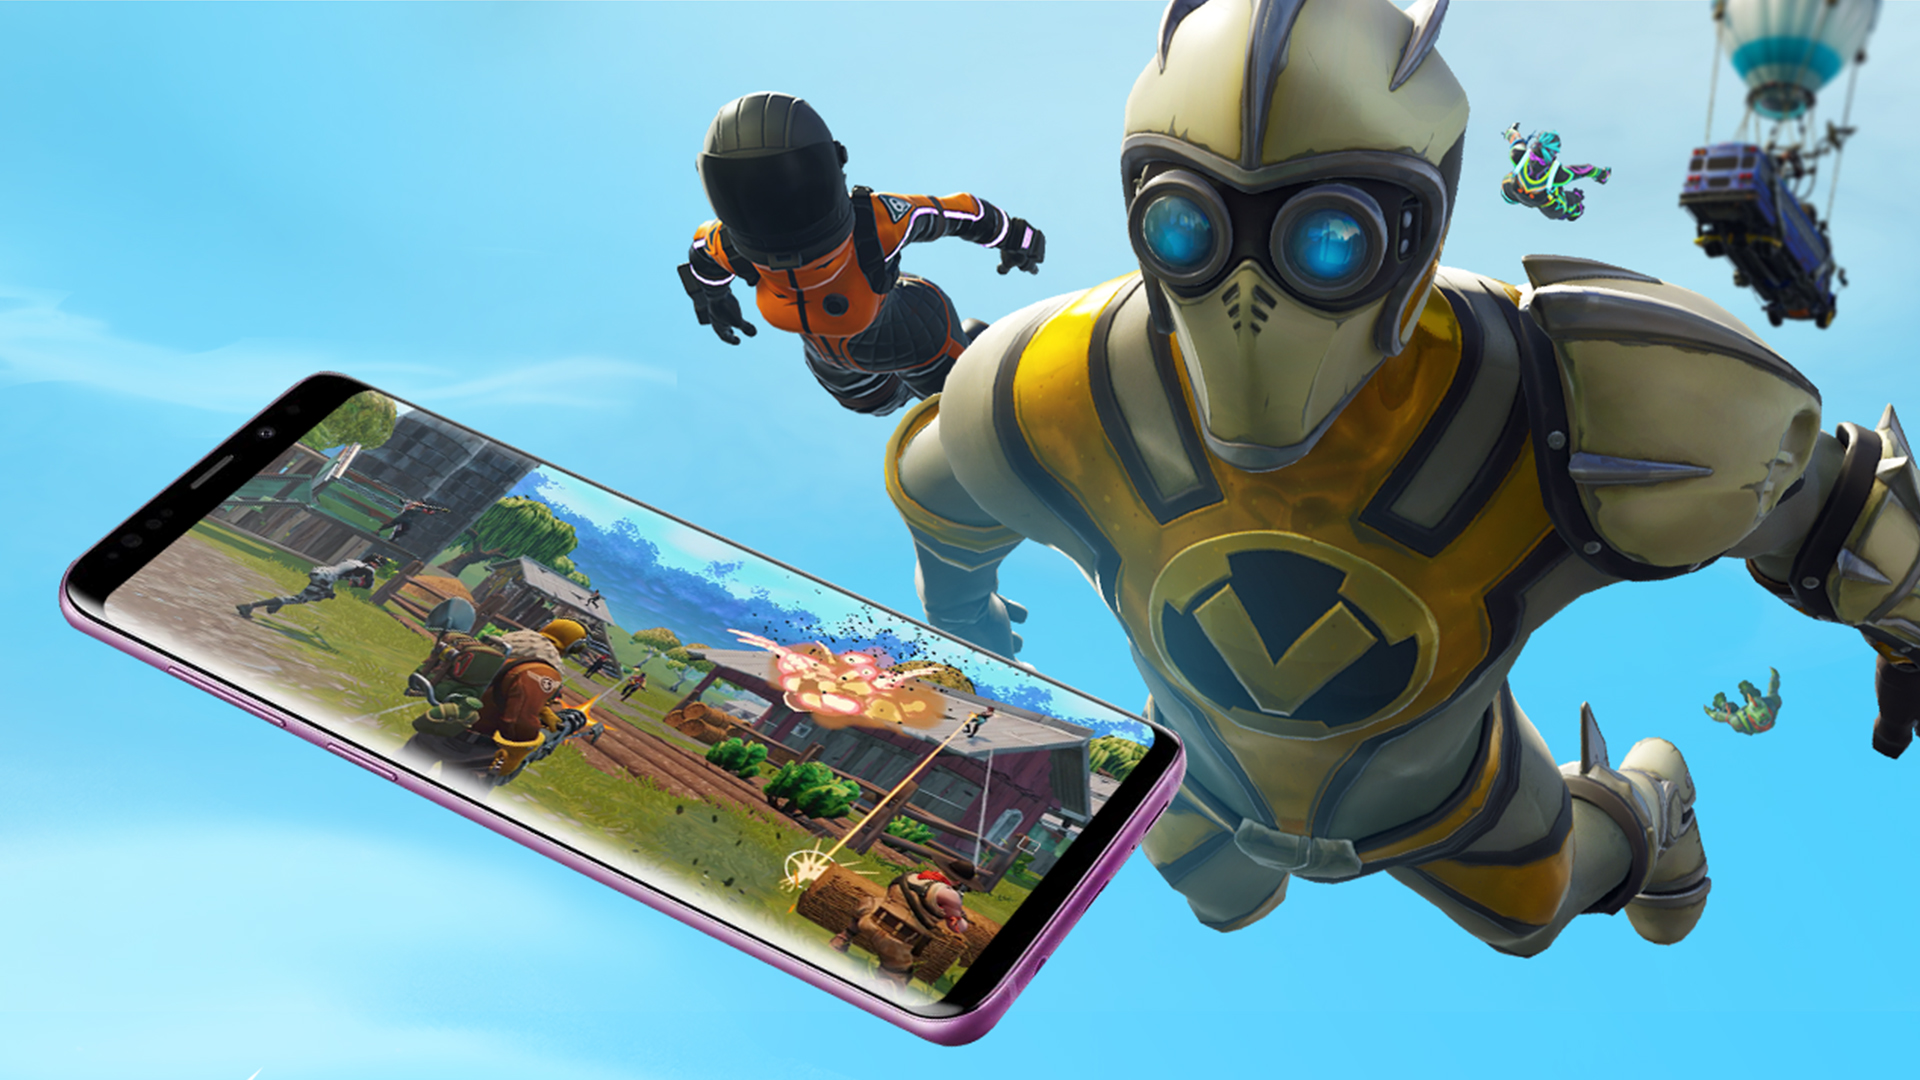 Fortnite blog Android BR05 Header 16 9 AndroidLaunch 1920x1080 7cab9f216f2f6f928f8d5d2394be157610e0638b